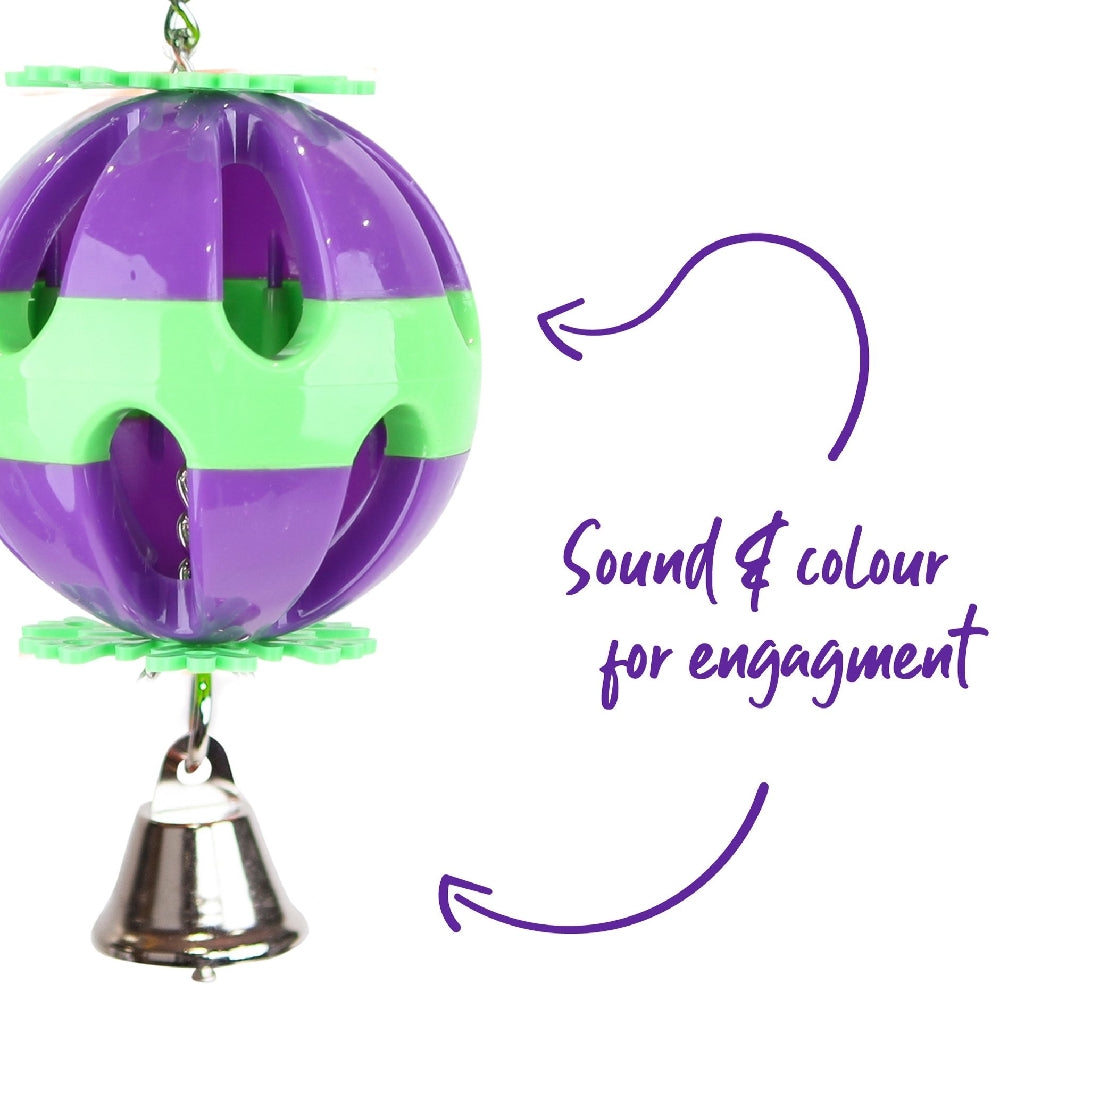 A purple and green hanging bird toy with bell for stimulation.